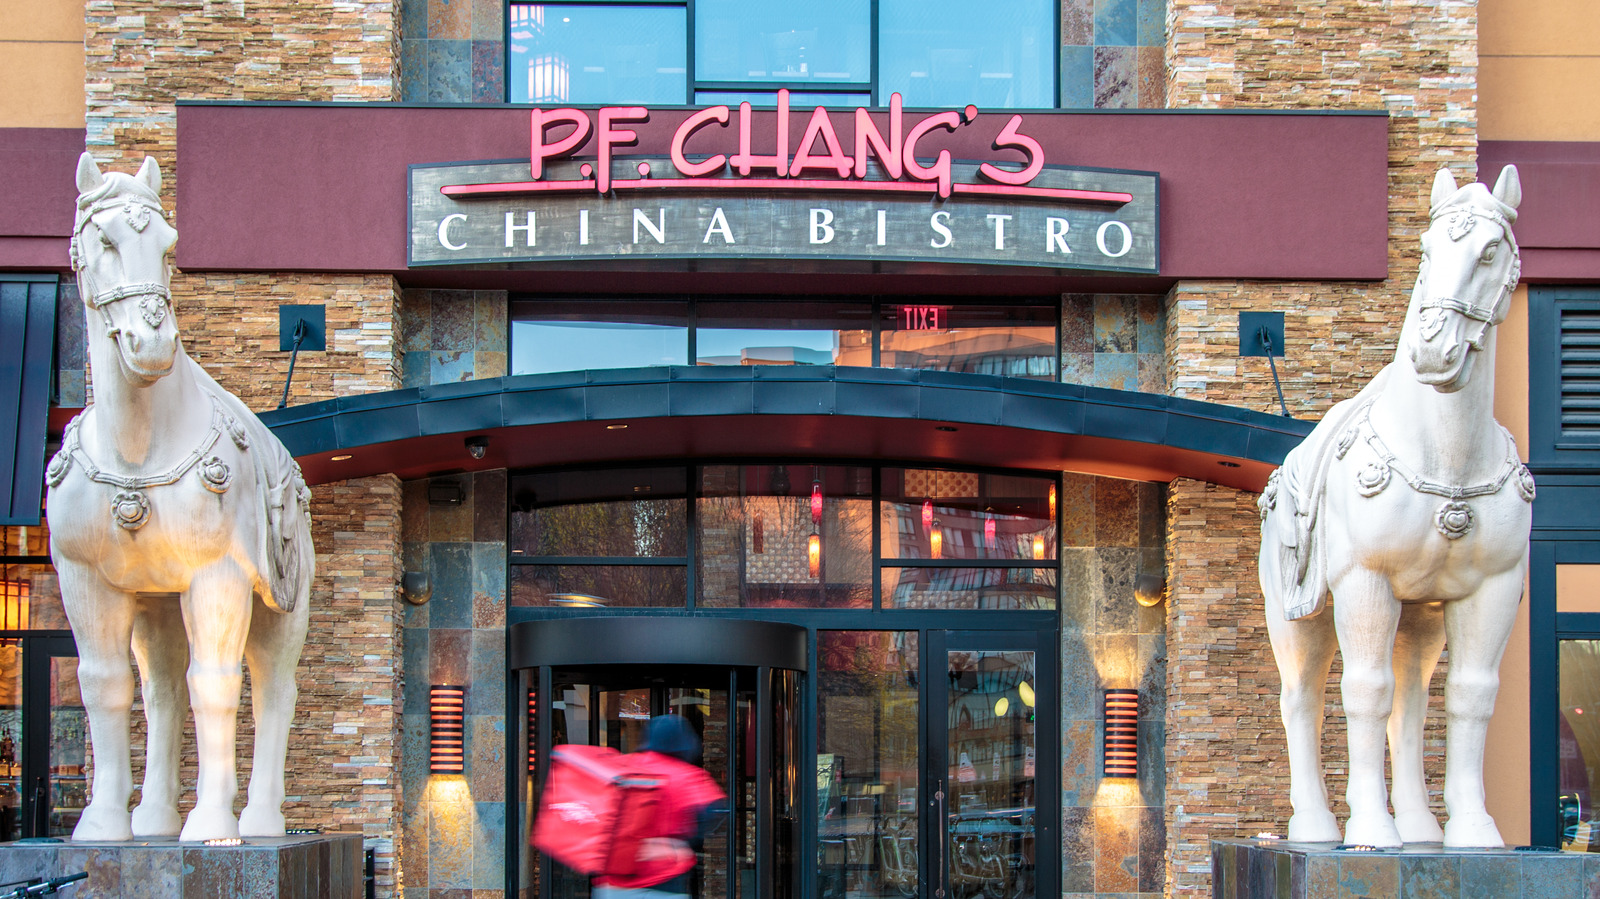 Workers Reveal What It's Really Like To Work At P.F. Chang's